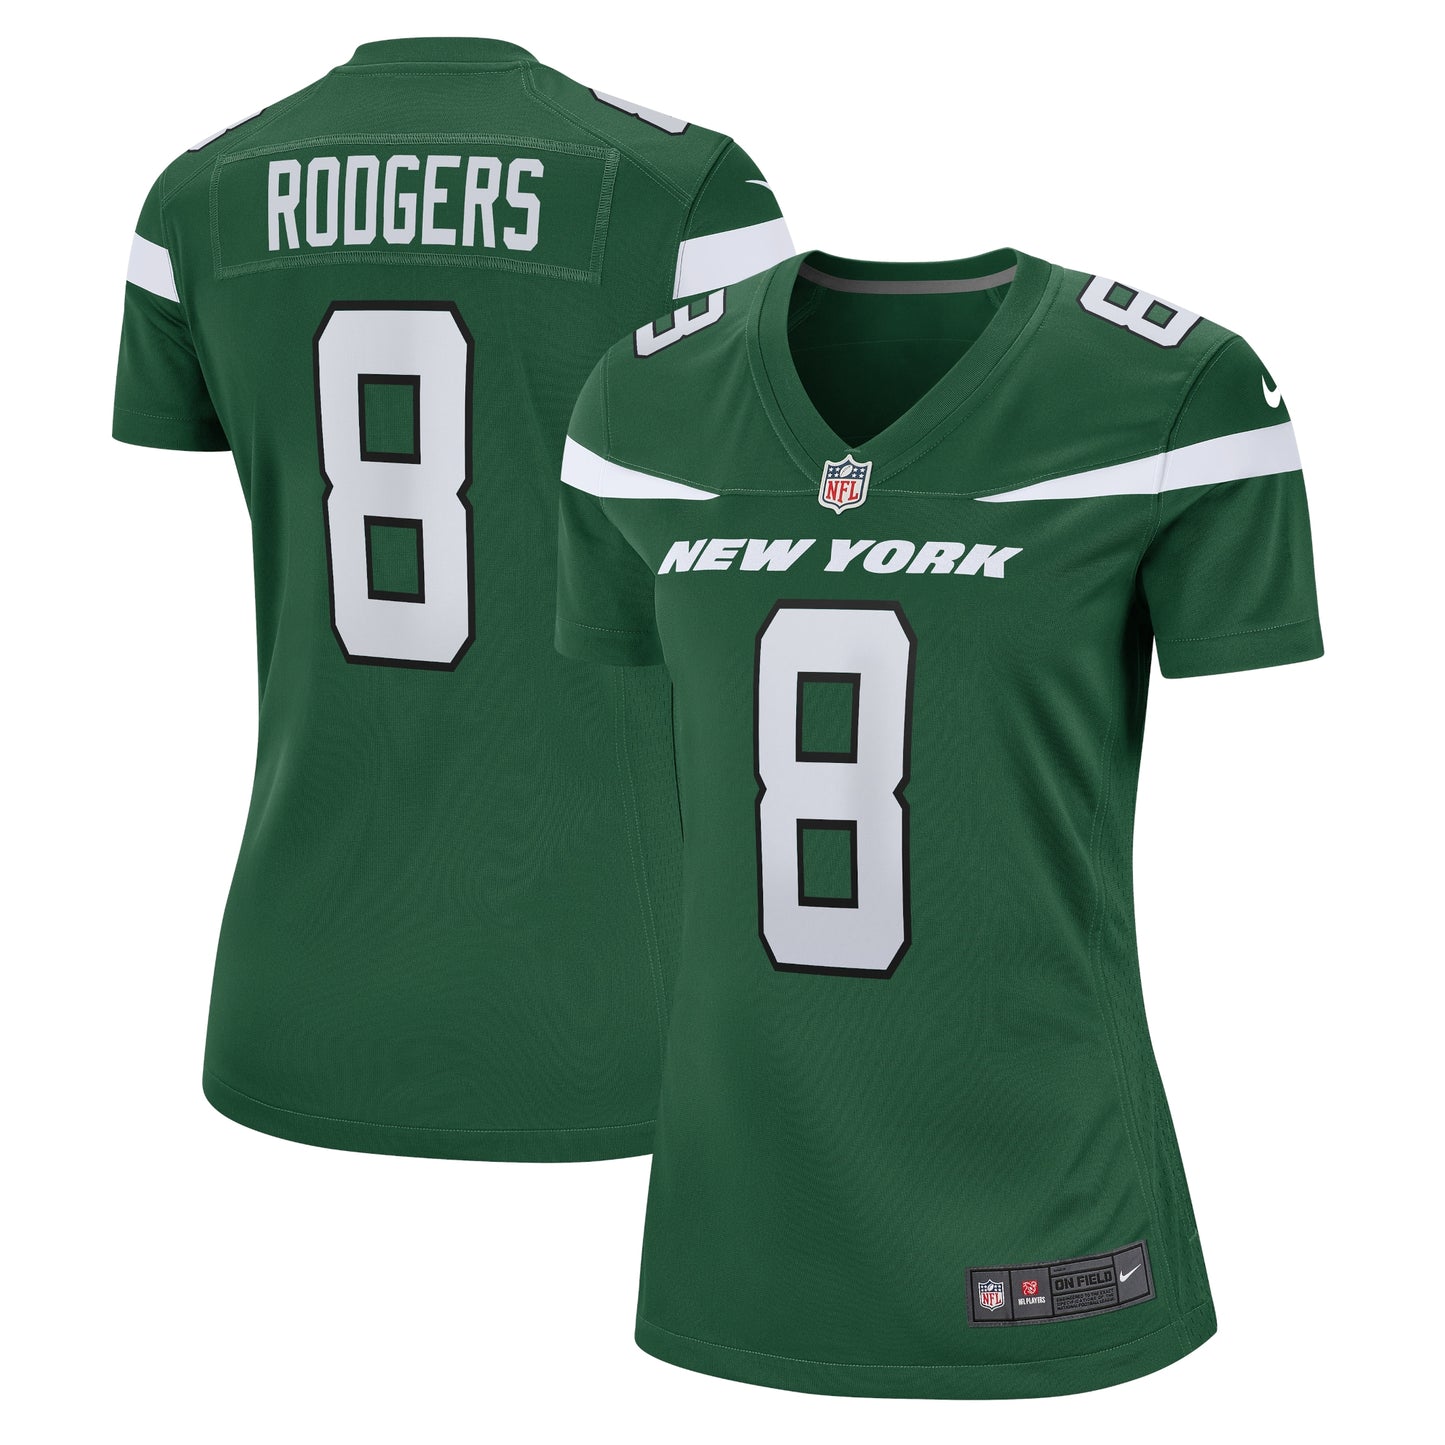 Aaron Rodgers New York Jets Nike Women's Player Jersey - Green